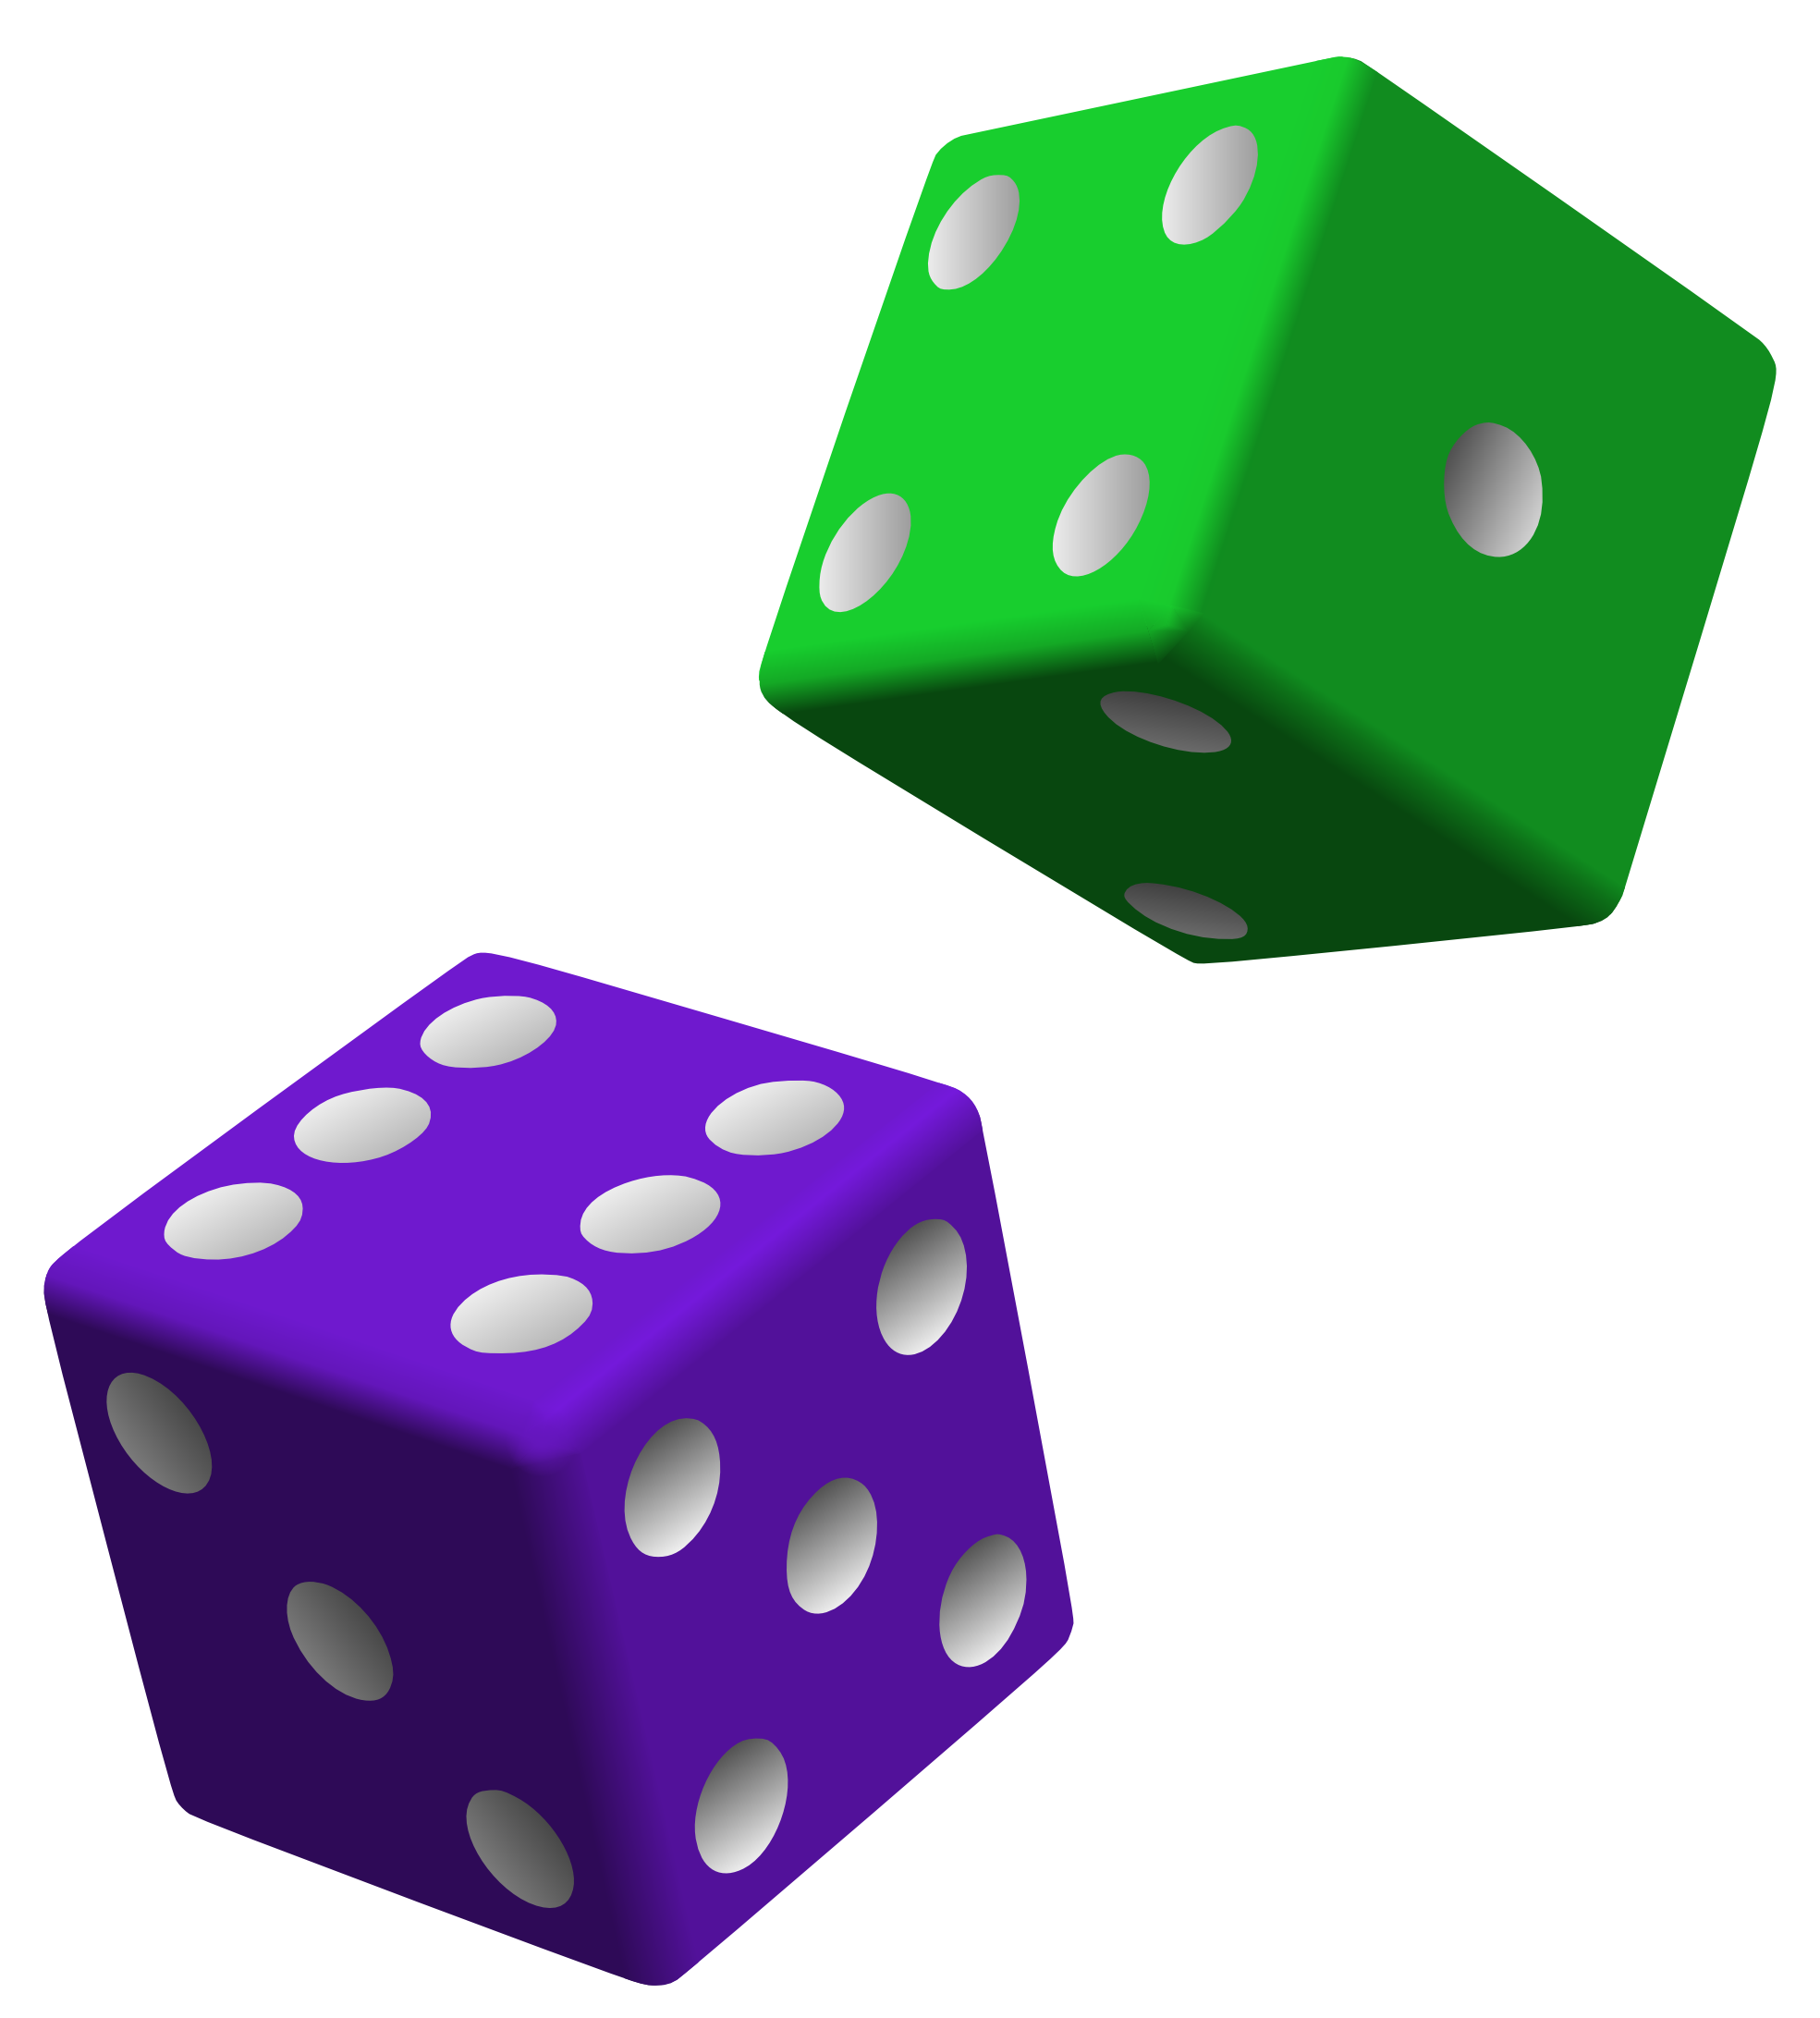 Clip Arts Related To : rolling dice gif transparent. view all Rolling Dice...